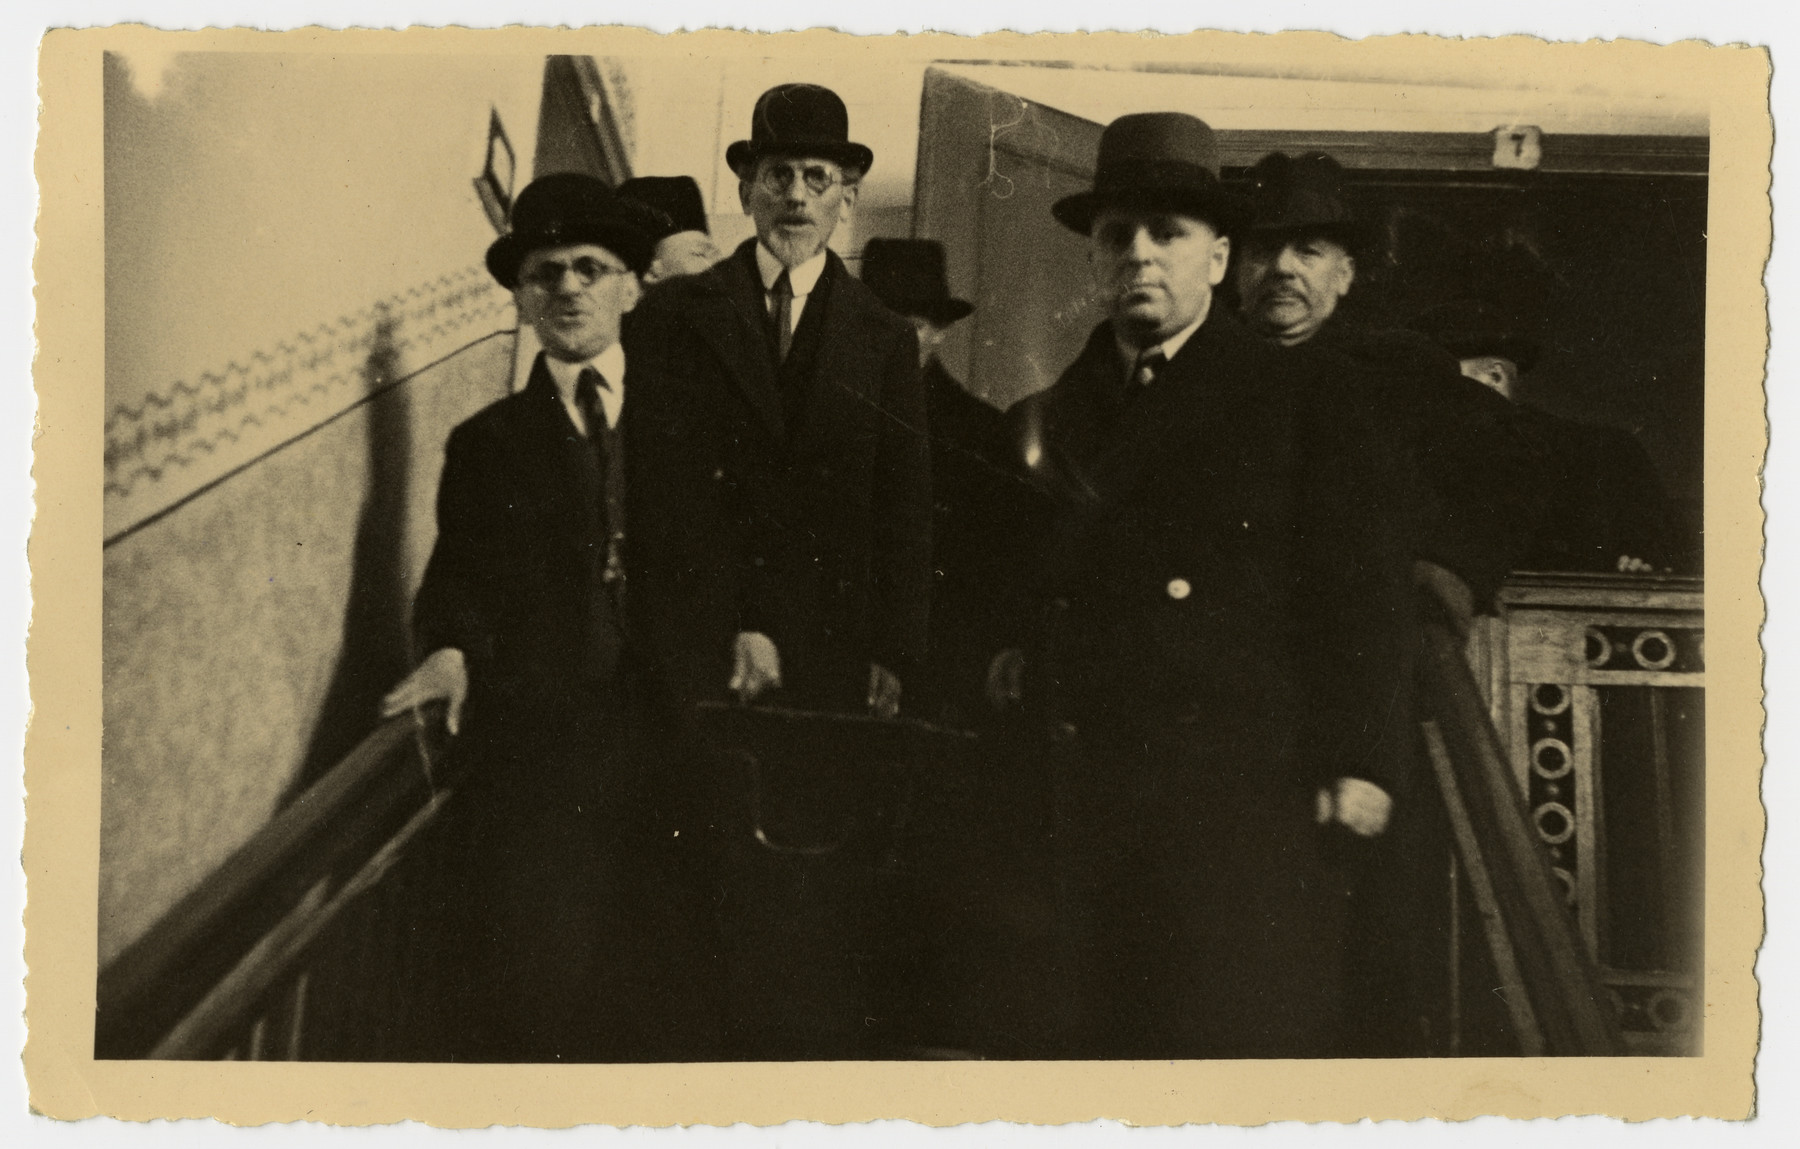 The body of Freida Albin is carried down the stairs prior to her funeral.

The husband of Rosa Preiss is in front, and Mr. Rosenthal is in the back.